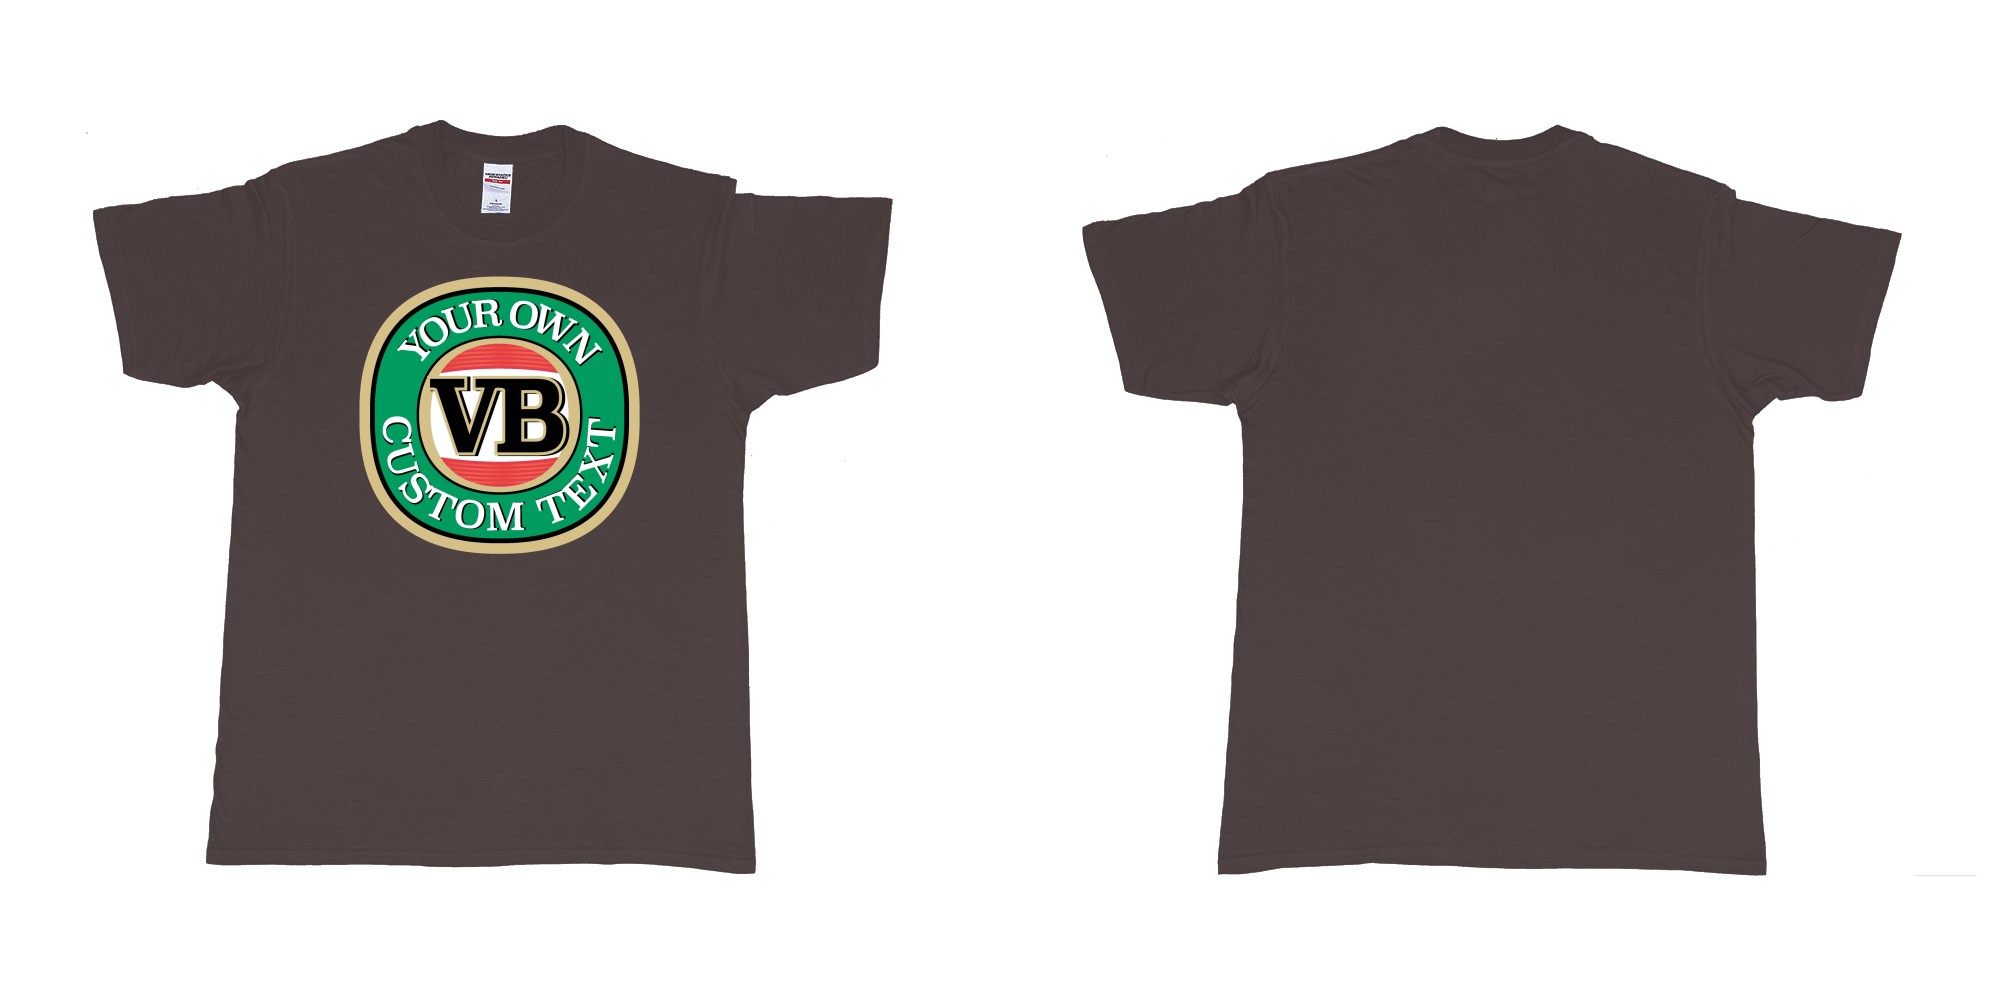 Custom tshirt design vb victoria bitter beer brand logo in fabric color dark-chocolate choice your own text made in Bali by The Pirate Way